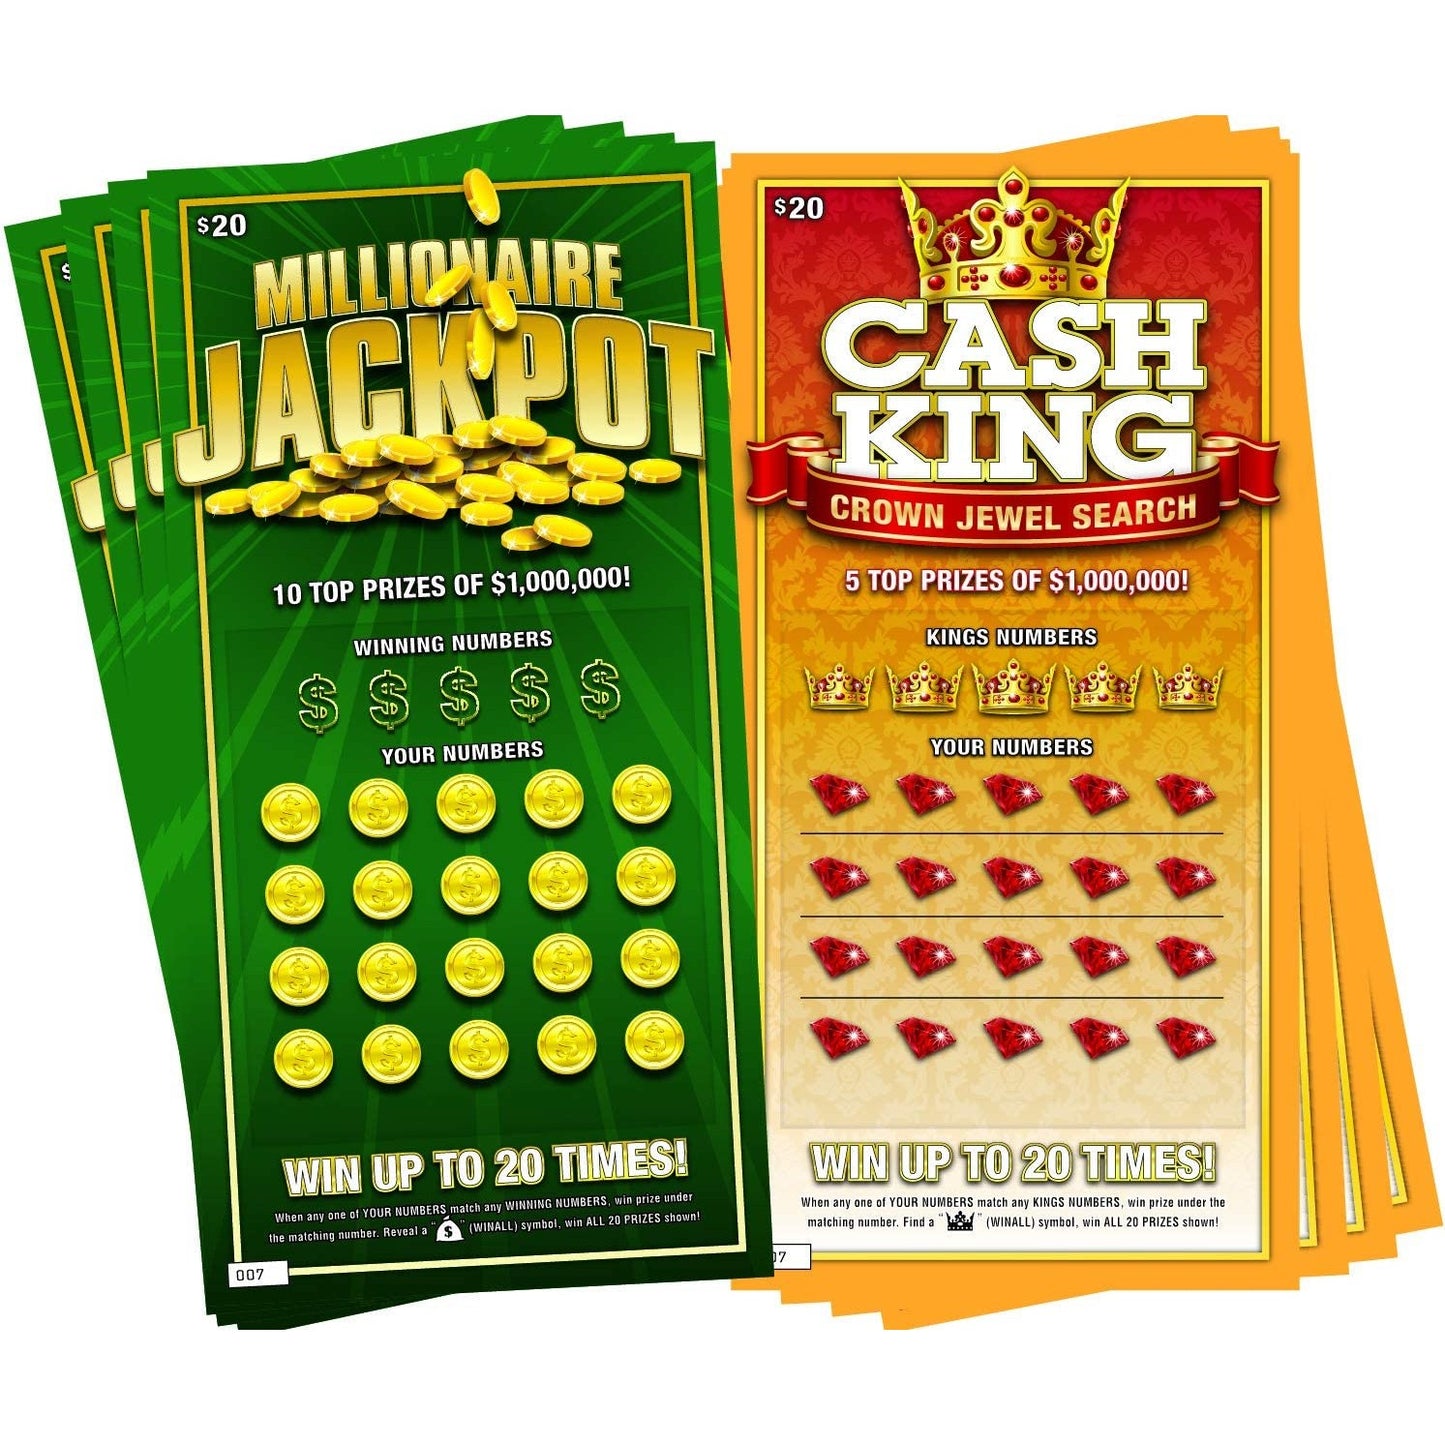 Eight fake lottery scratch-off tickets called Millionaire Jackpot and Cash King.